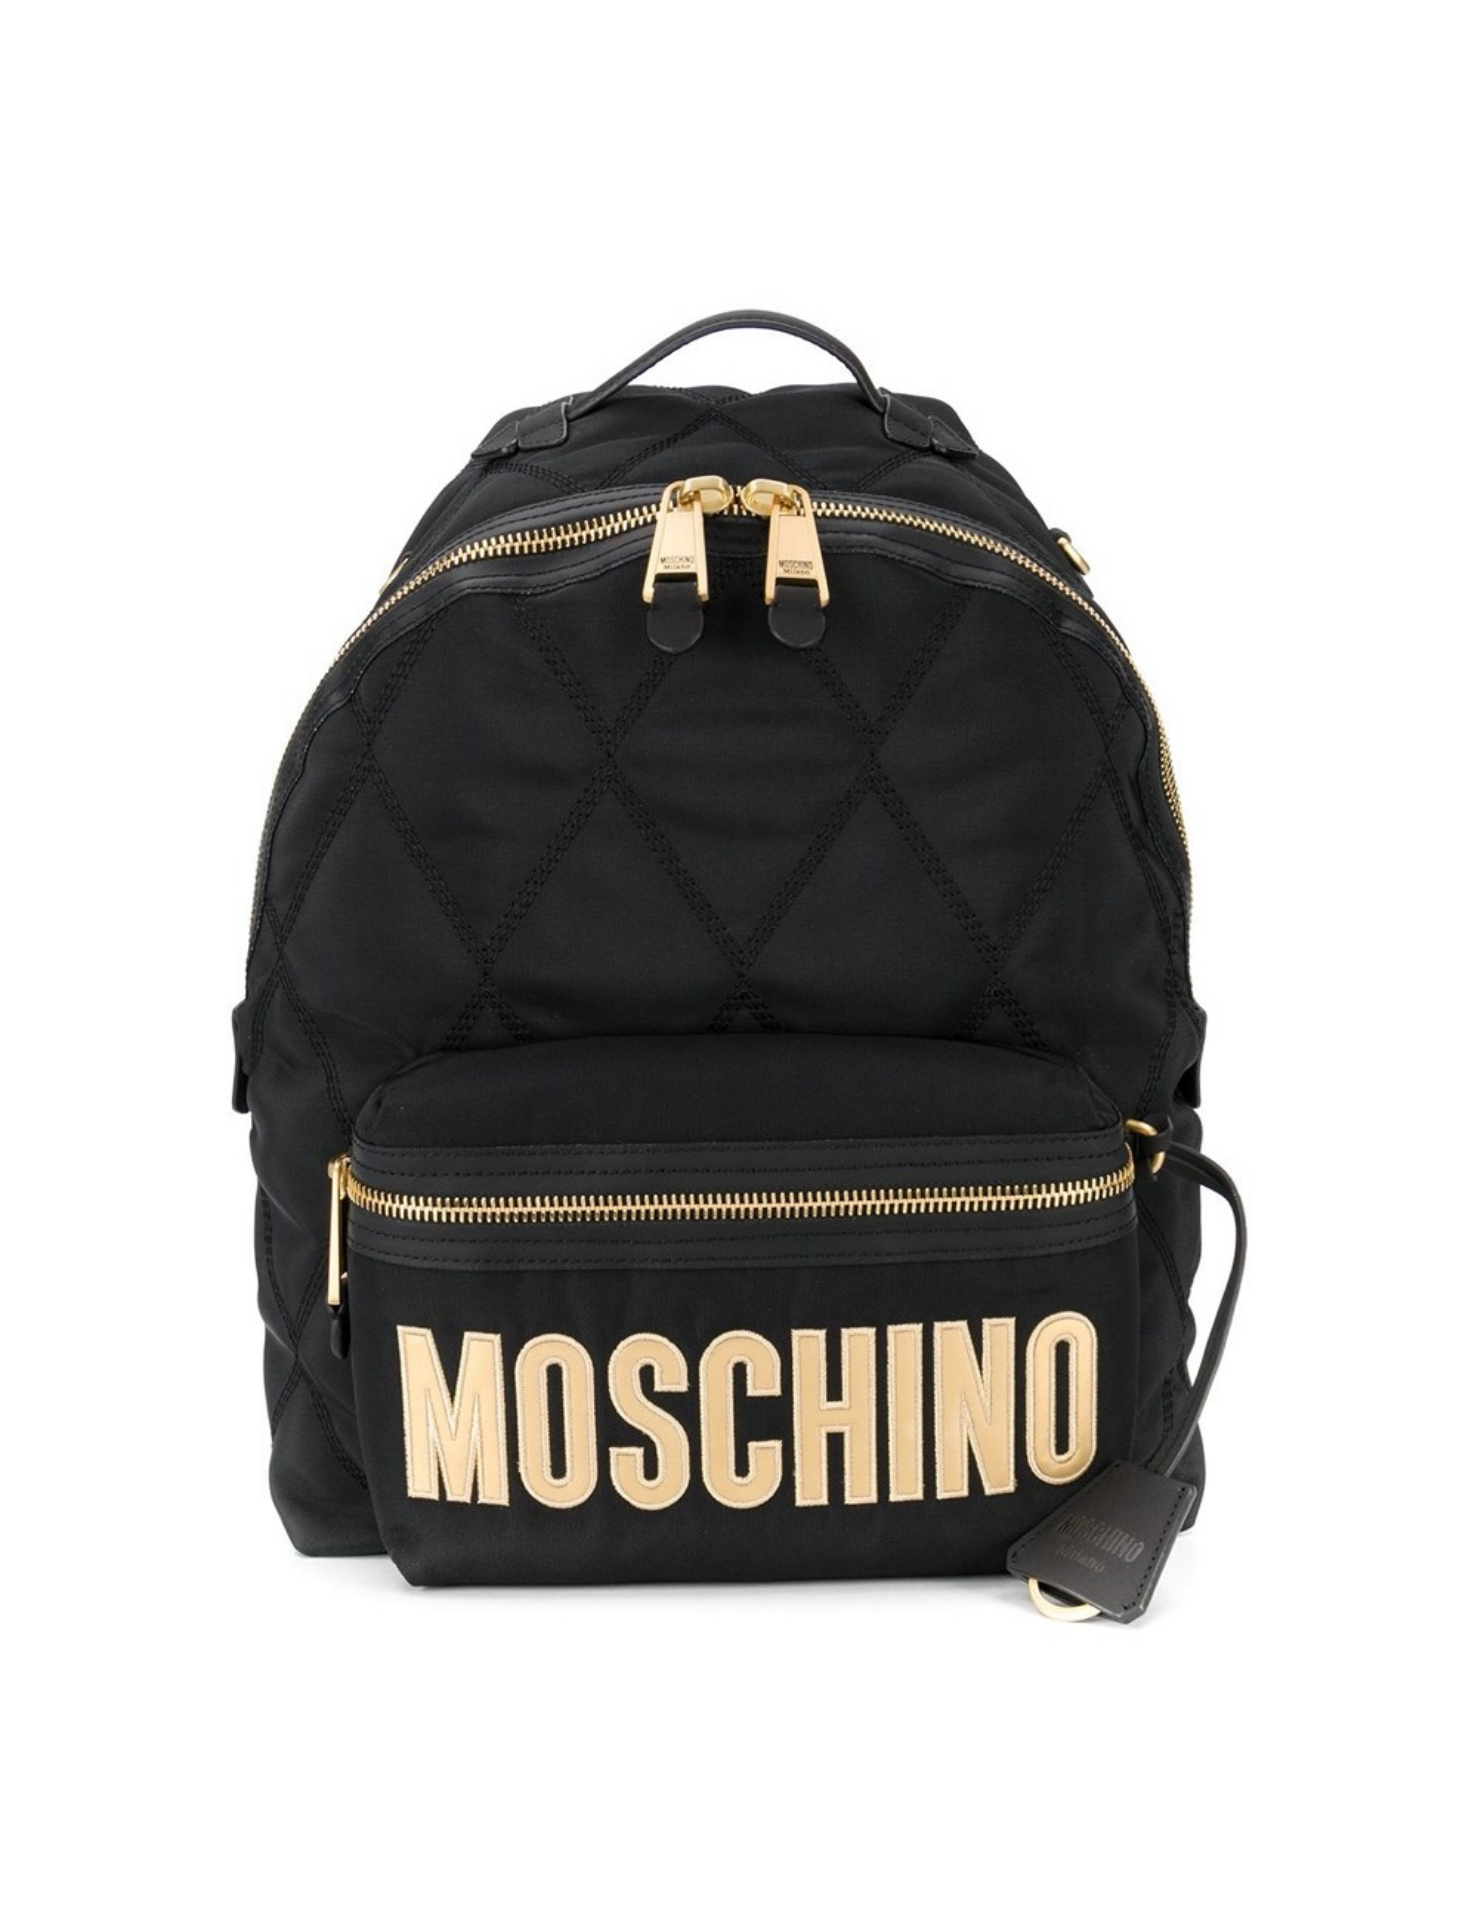 Moschino Black Quilted Nylon and Neoprene Logo Backpack